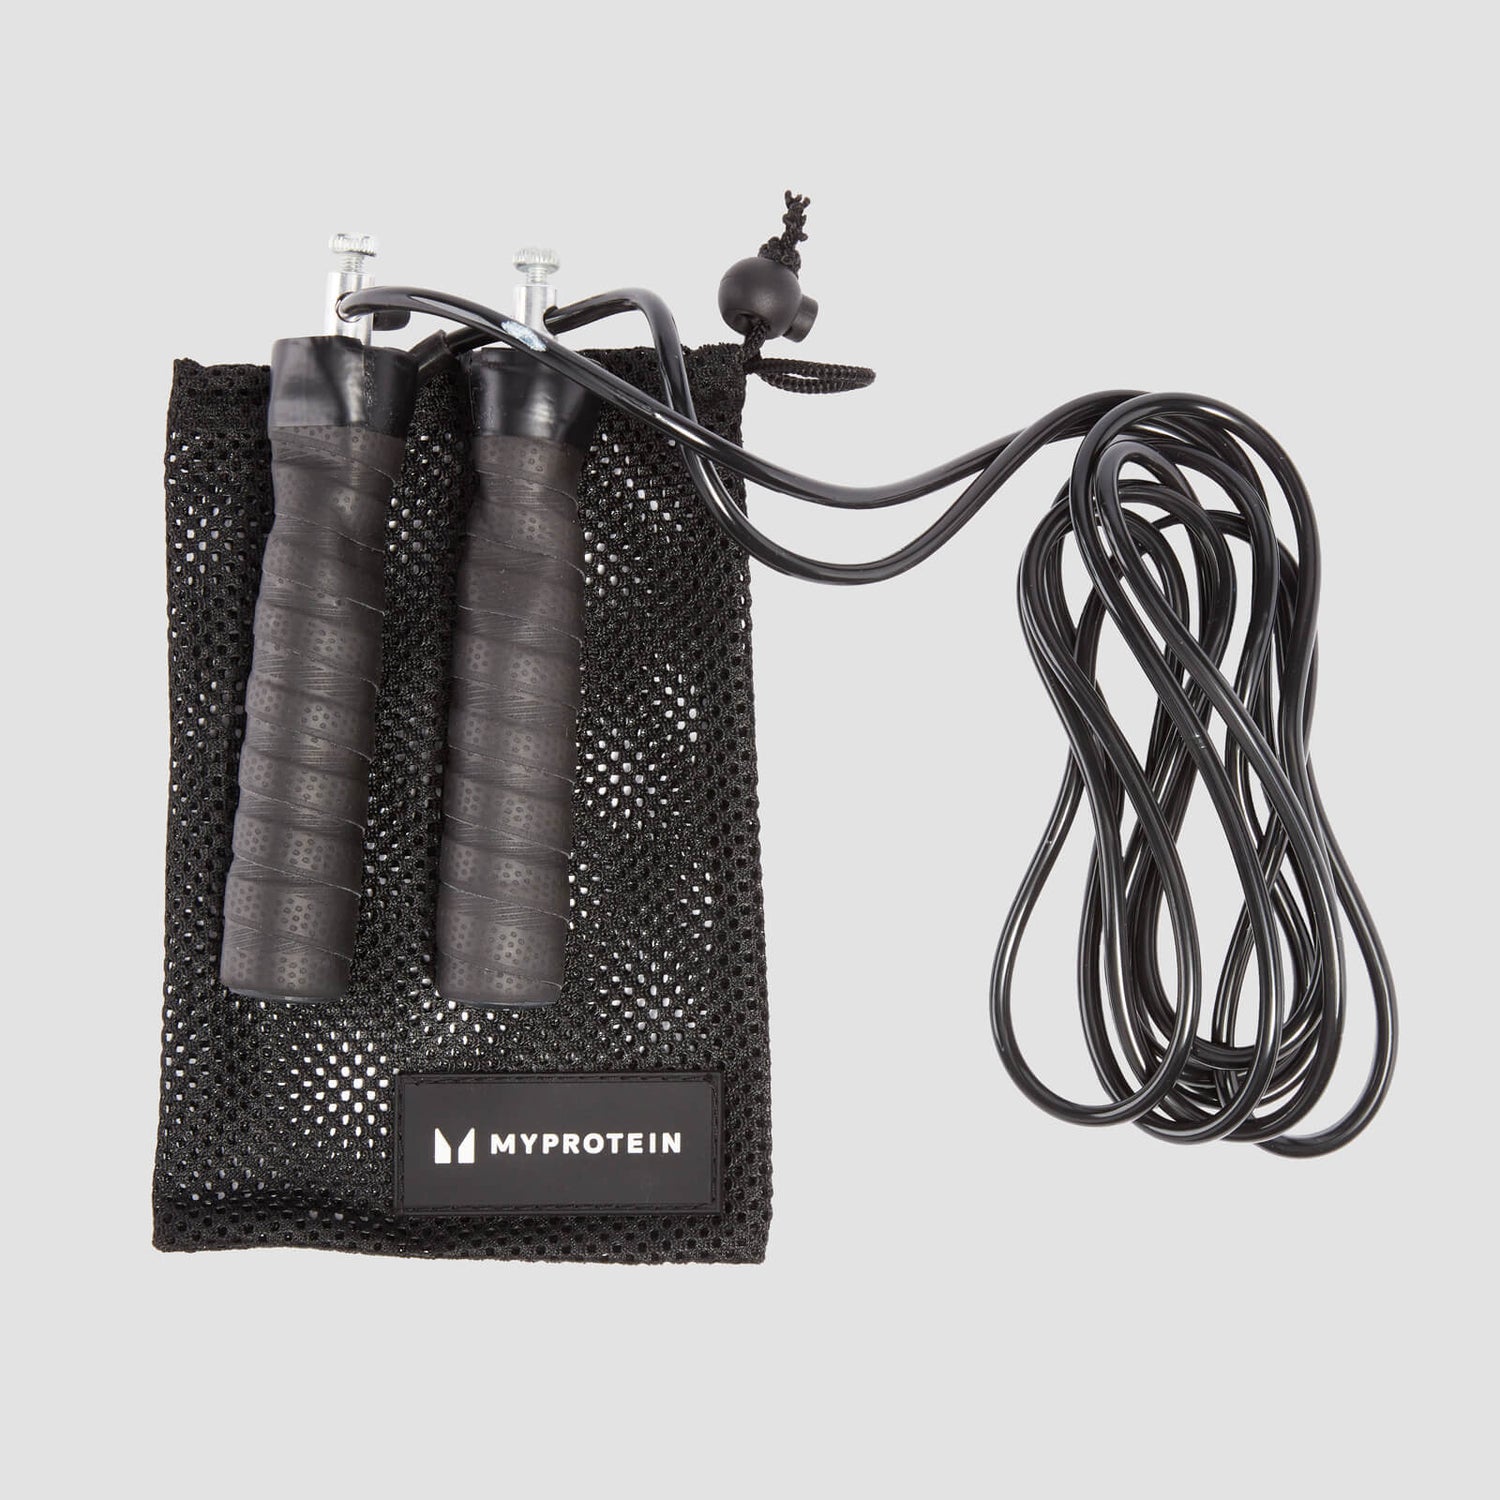 Myprotein Deluxe Skipping Rope – Sort